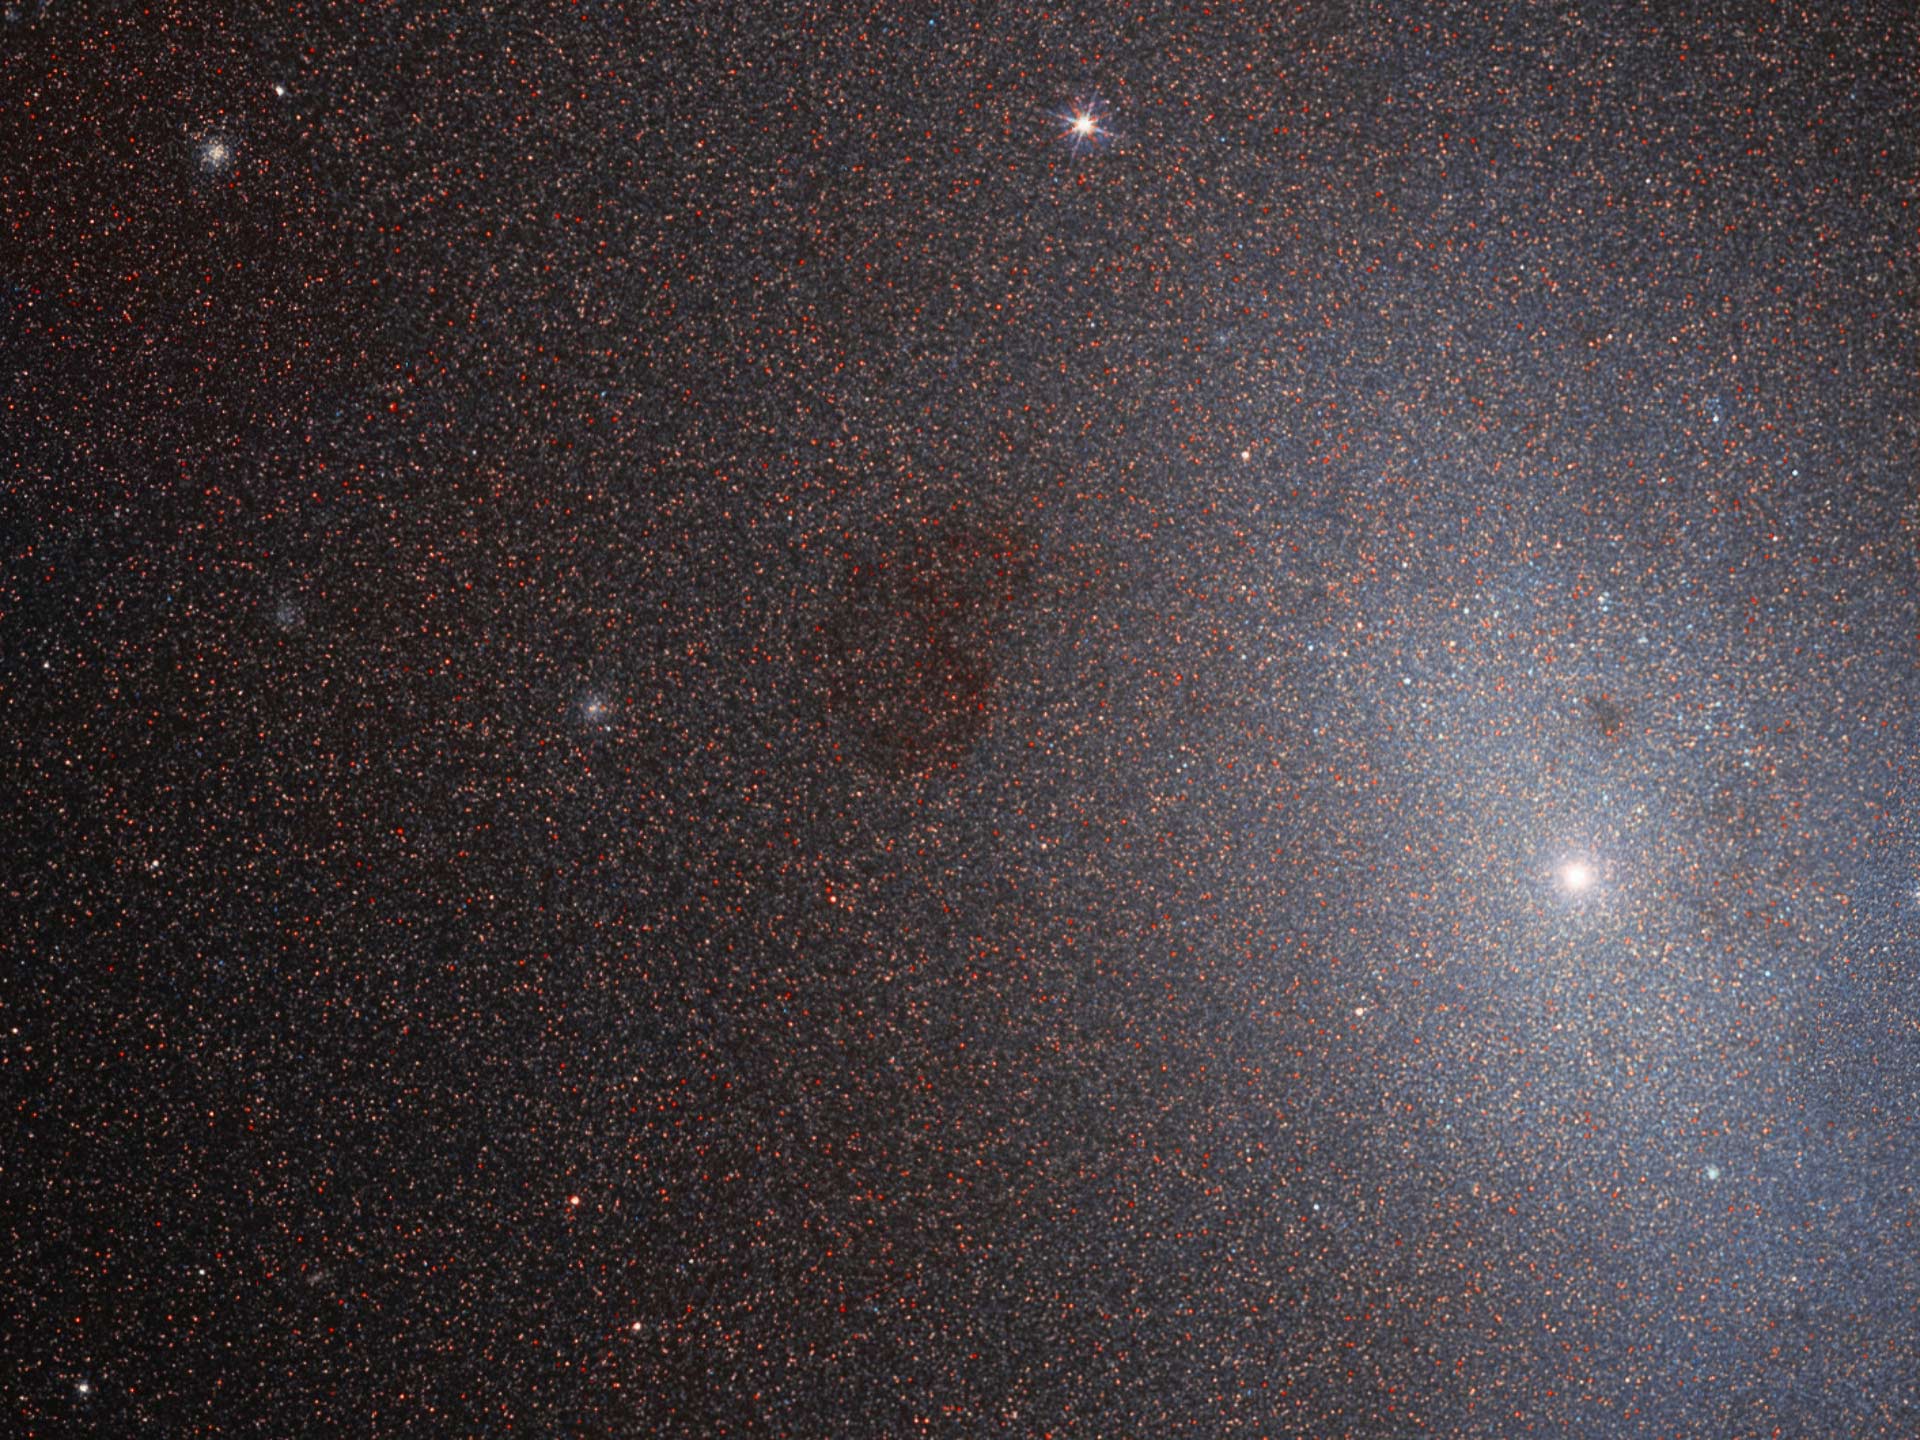 NASA Releases New Image of Dwarf Elliptical Galaxy Messier 110